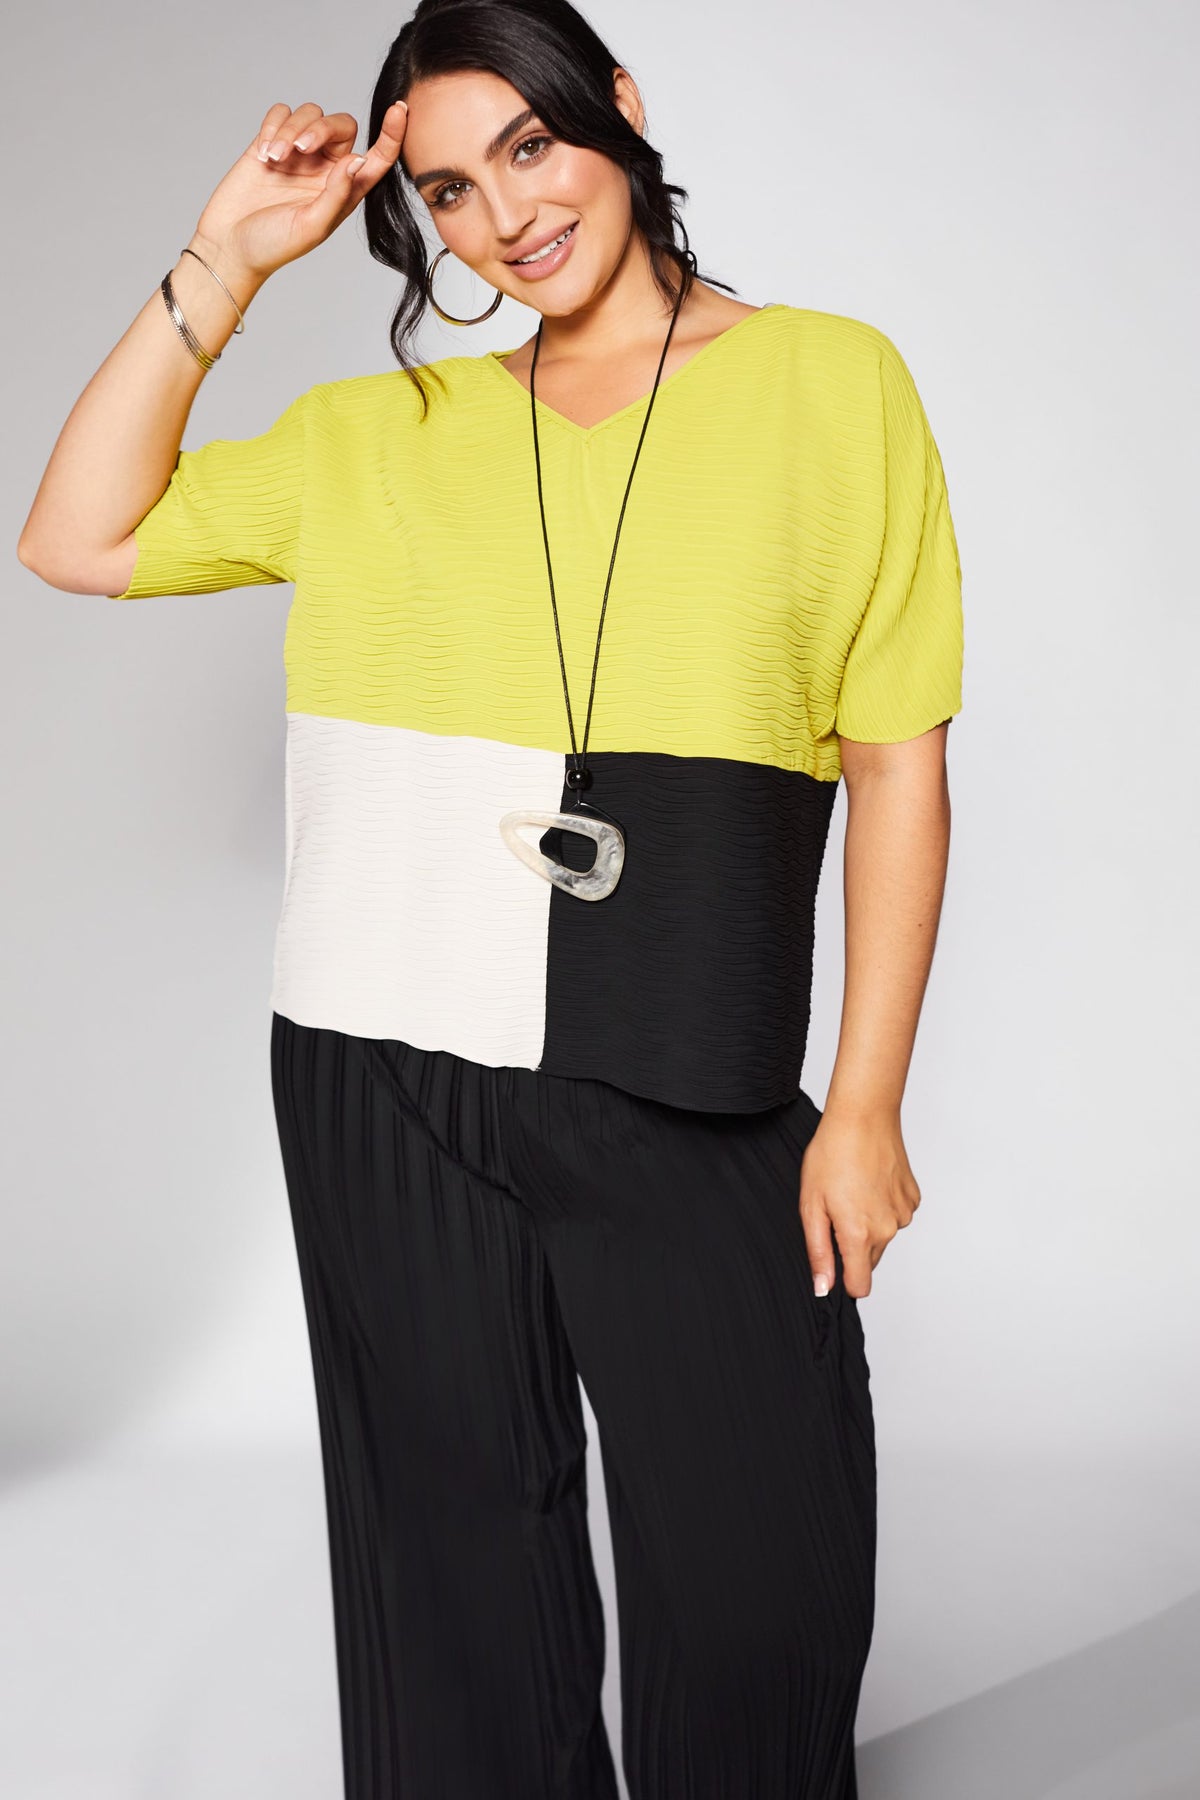 Ora Wave Pleated Top